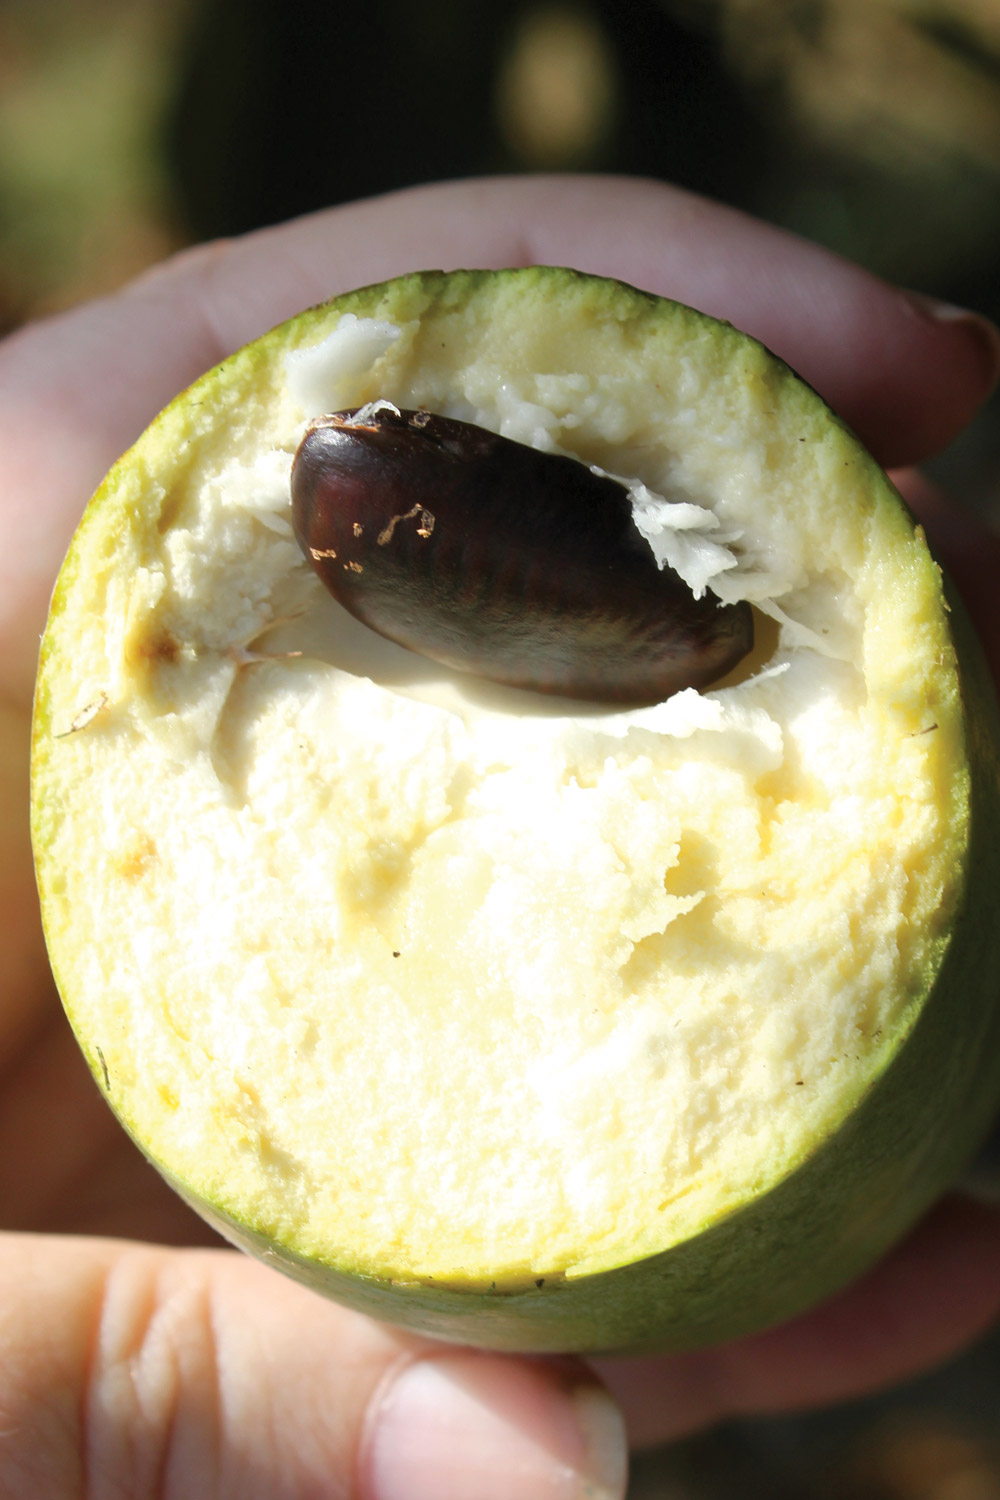 Cross-section of a pawpaw, showing custardy flesh and large brown pawpaw seed.